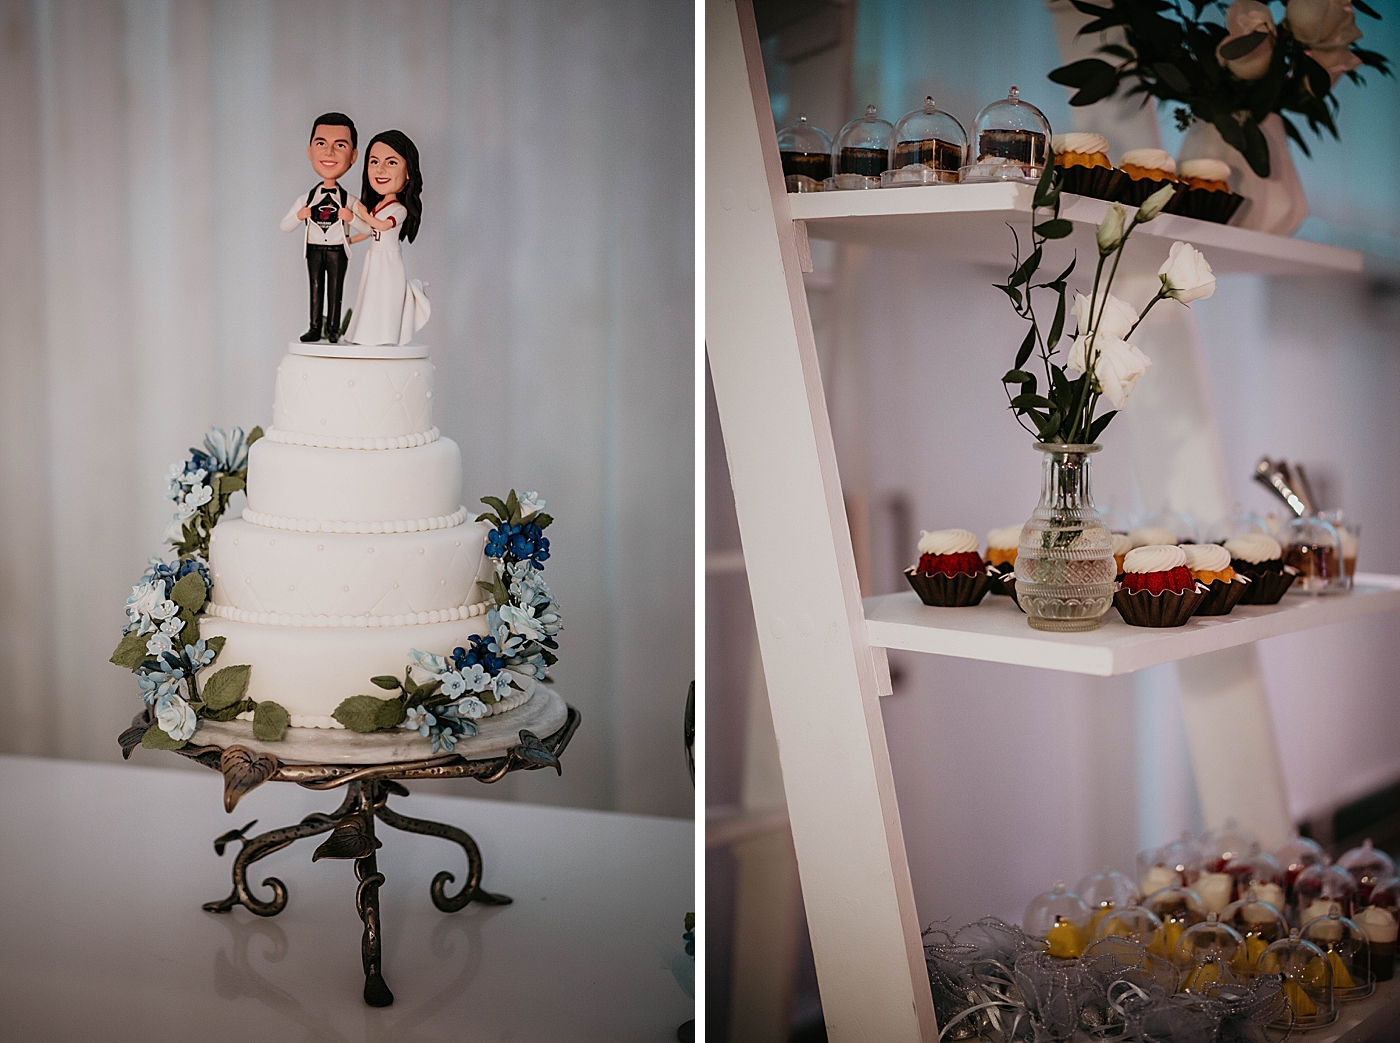 Detail shot of wedding cake with fun couple topper superman pose and cupcakes Lavan Venue Wedding Photography captured by South Florida Wedding Photographer Krystal Capone Photography